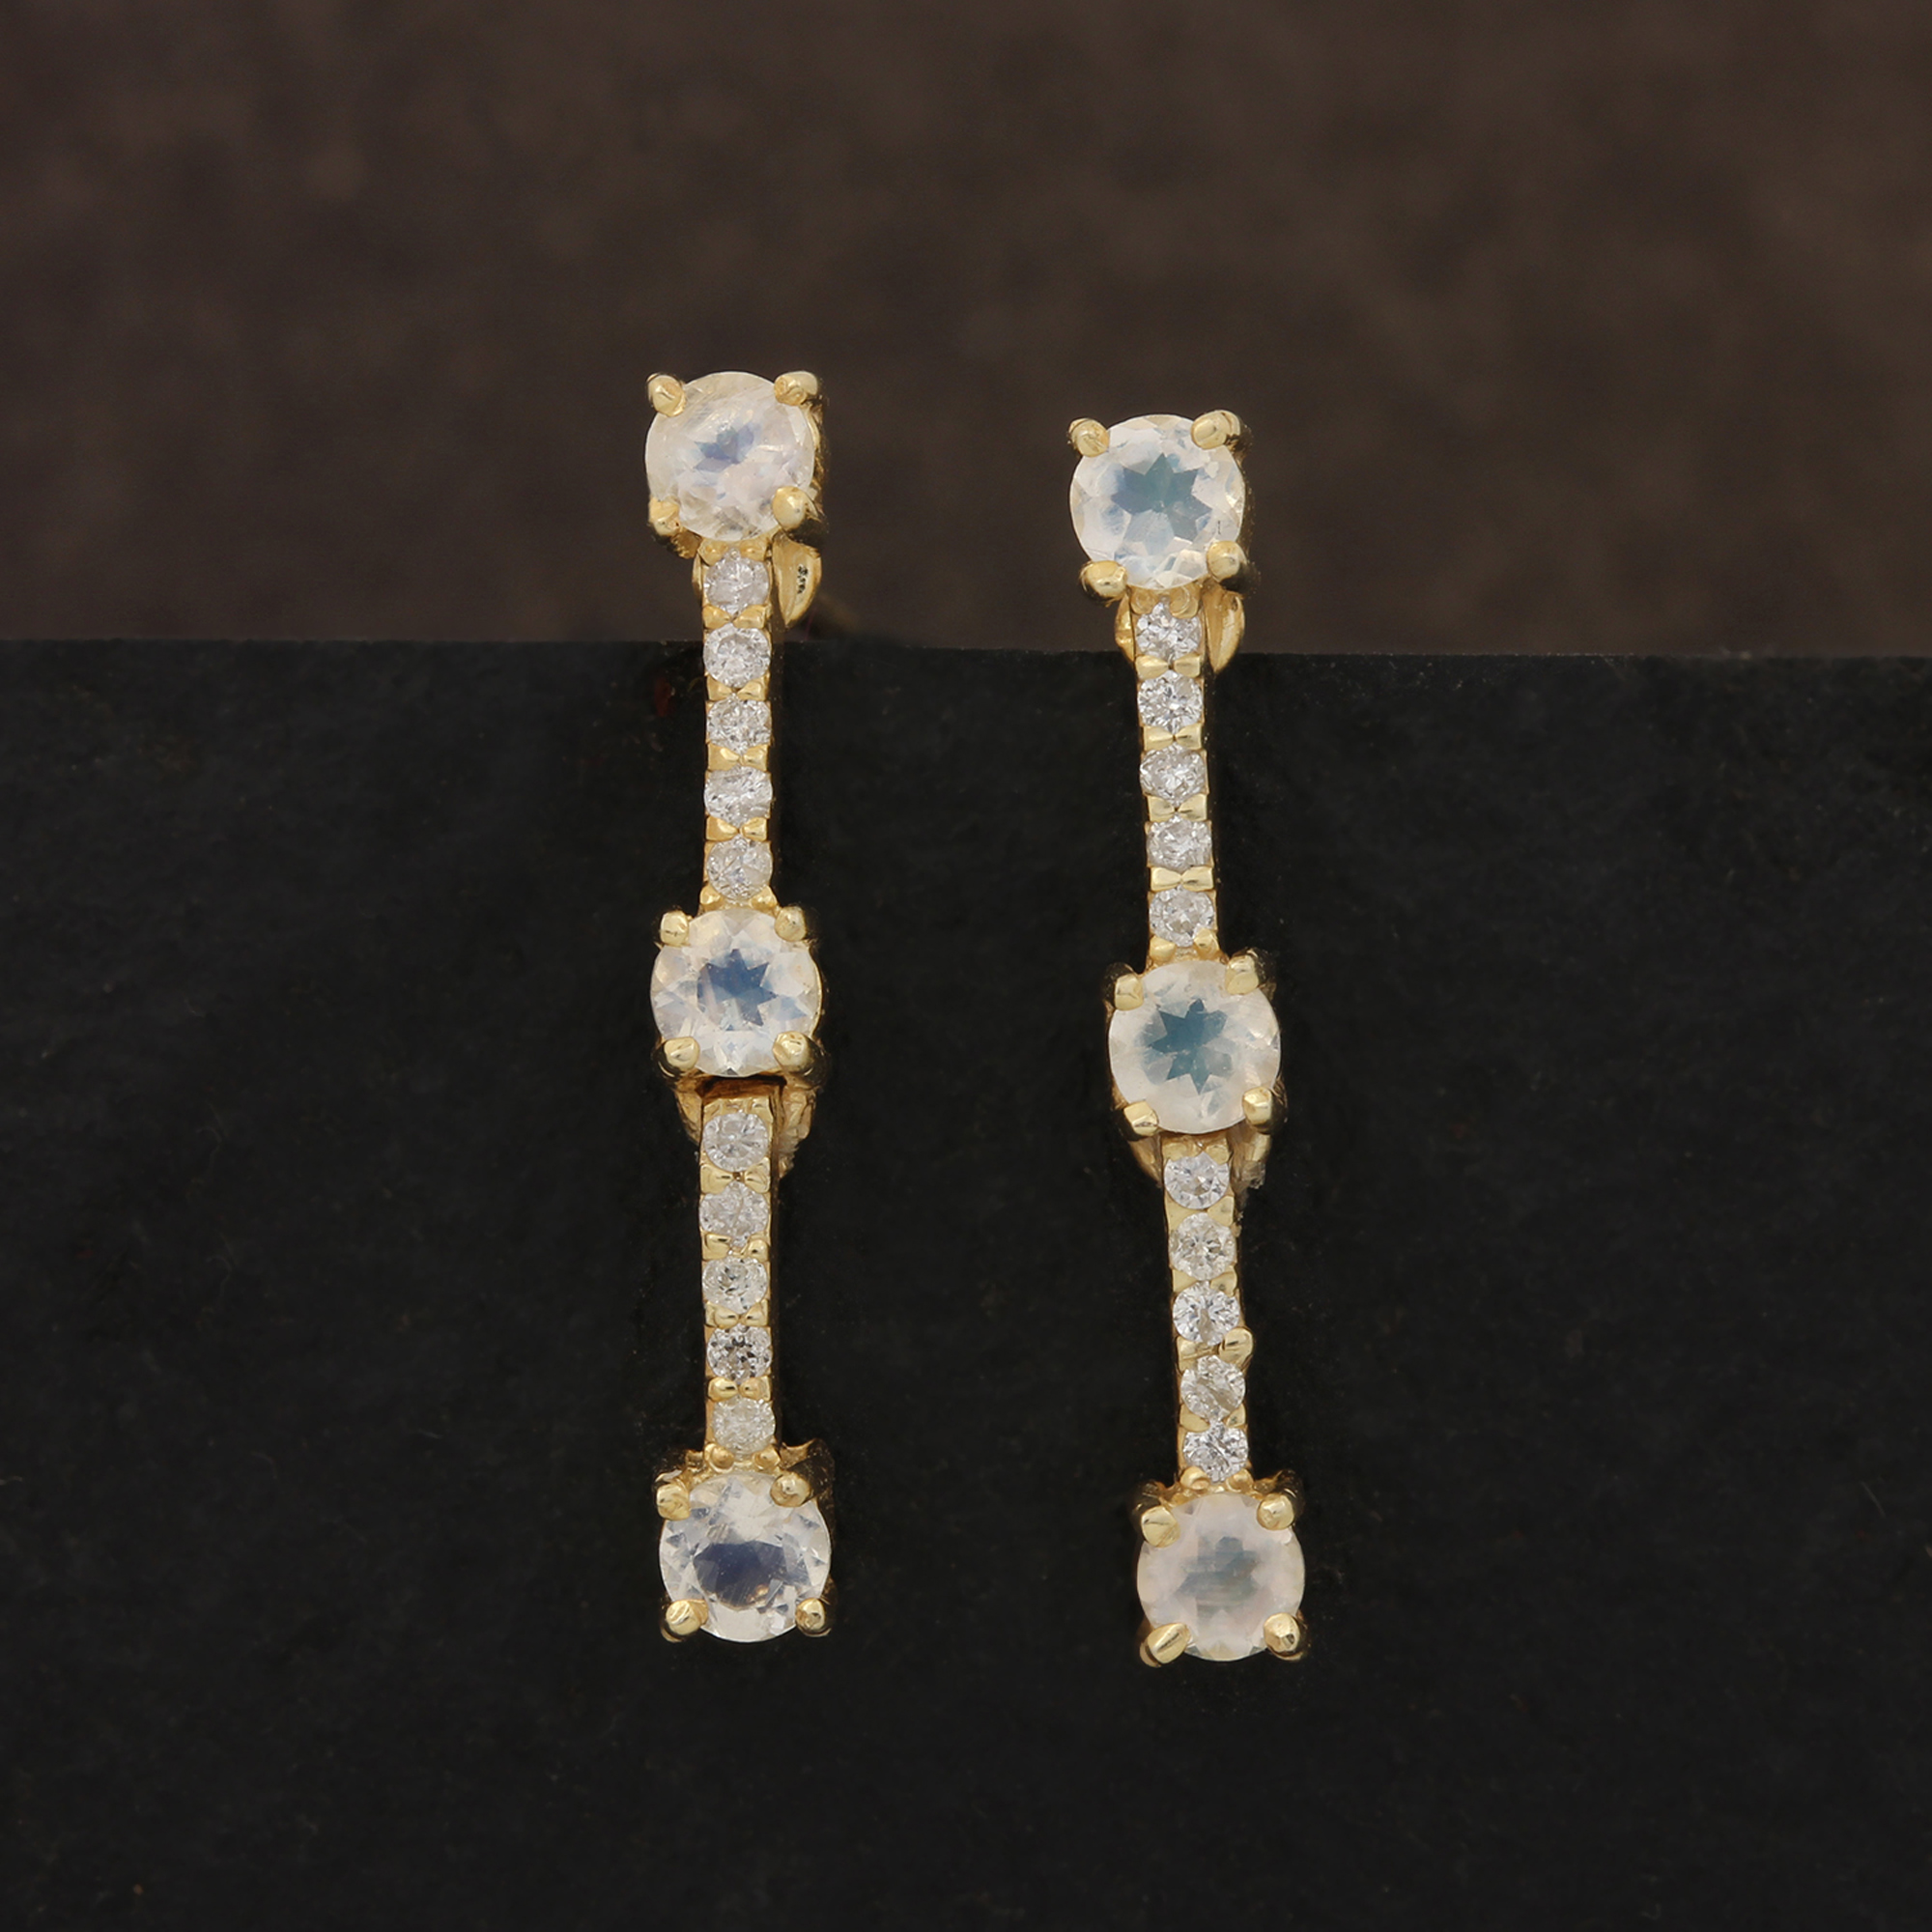 14k Solid Gold Stud Earrings Adorned With Diamond & Moonstone